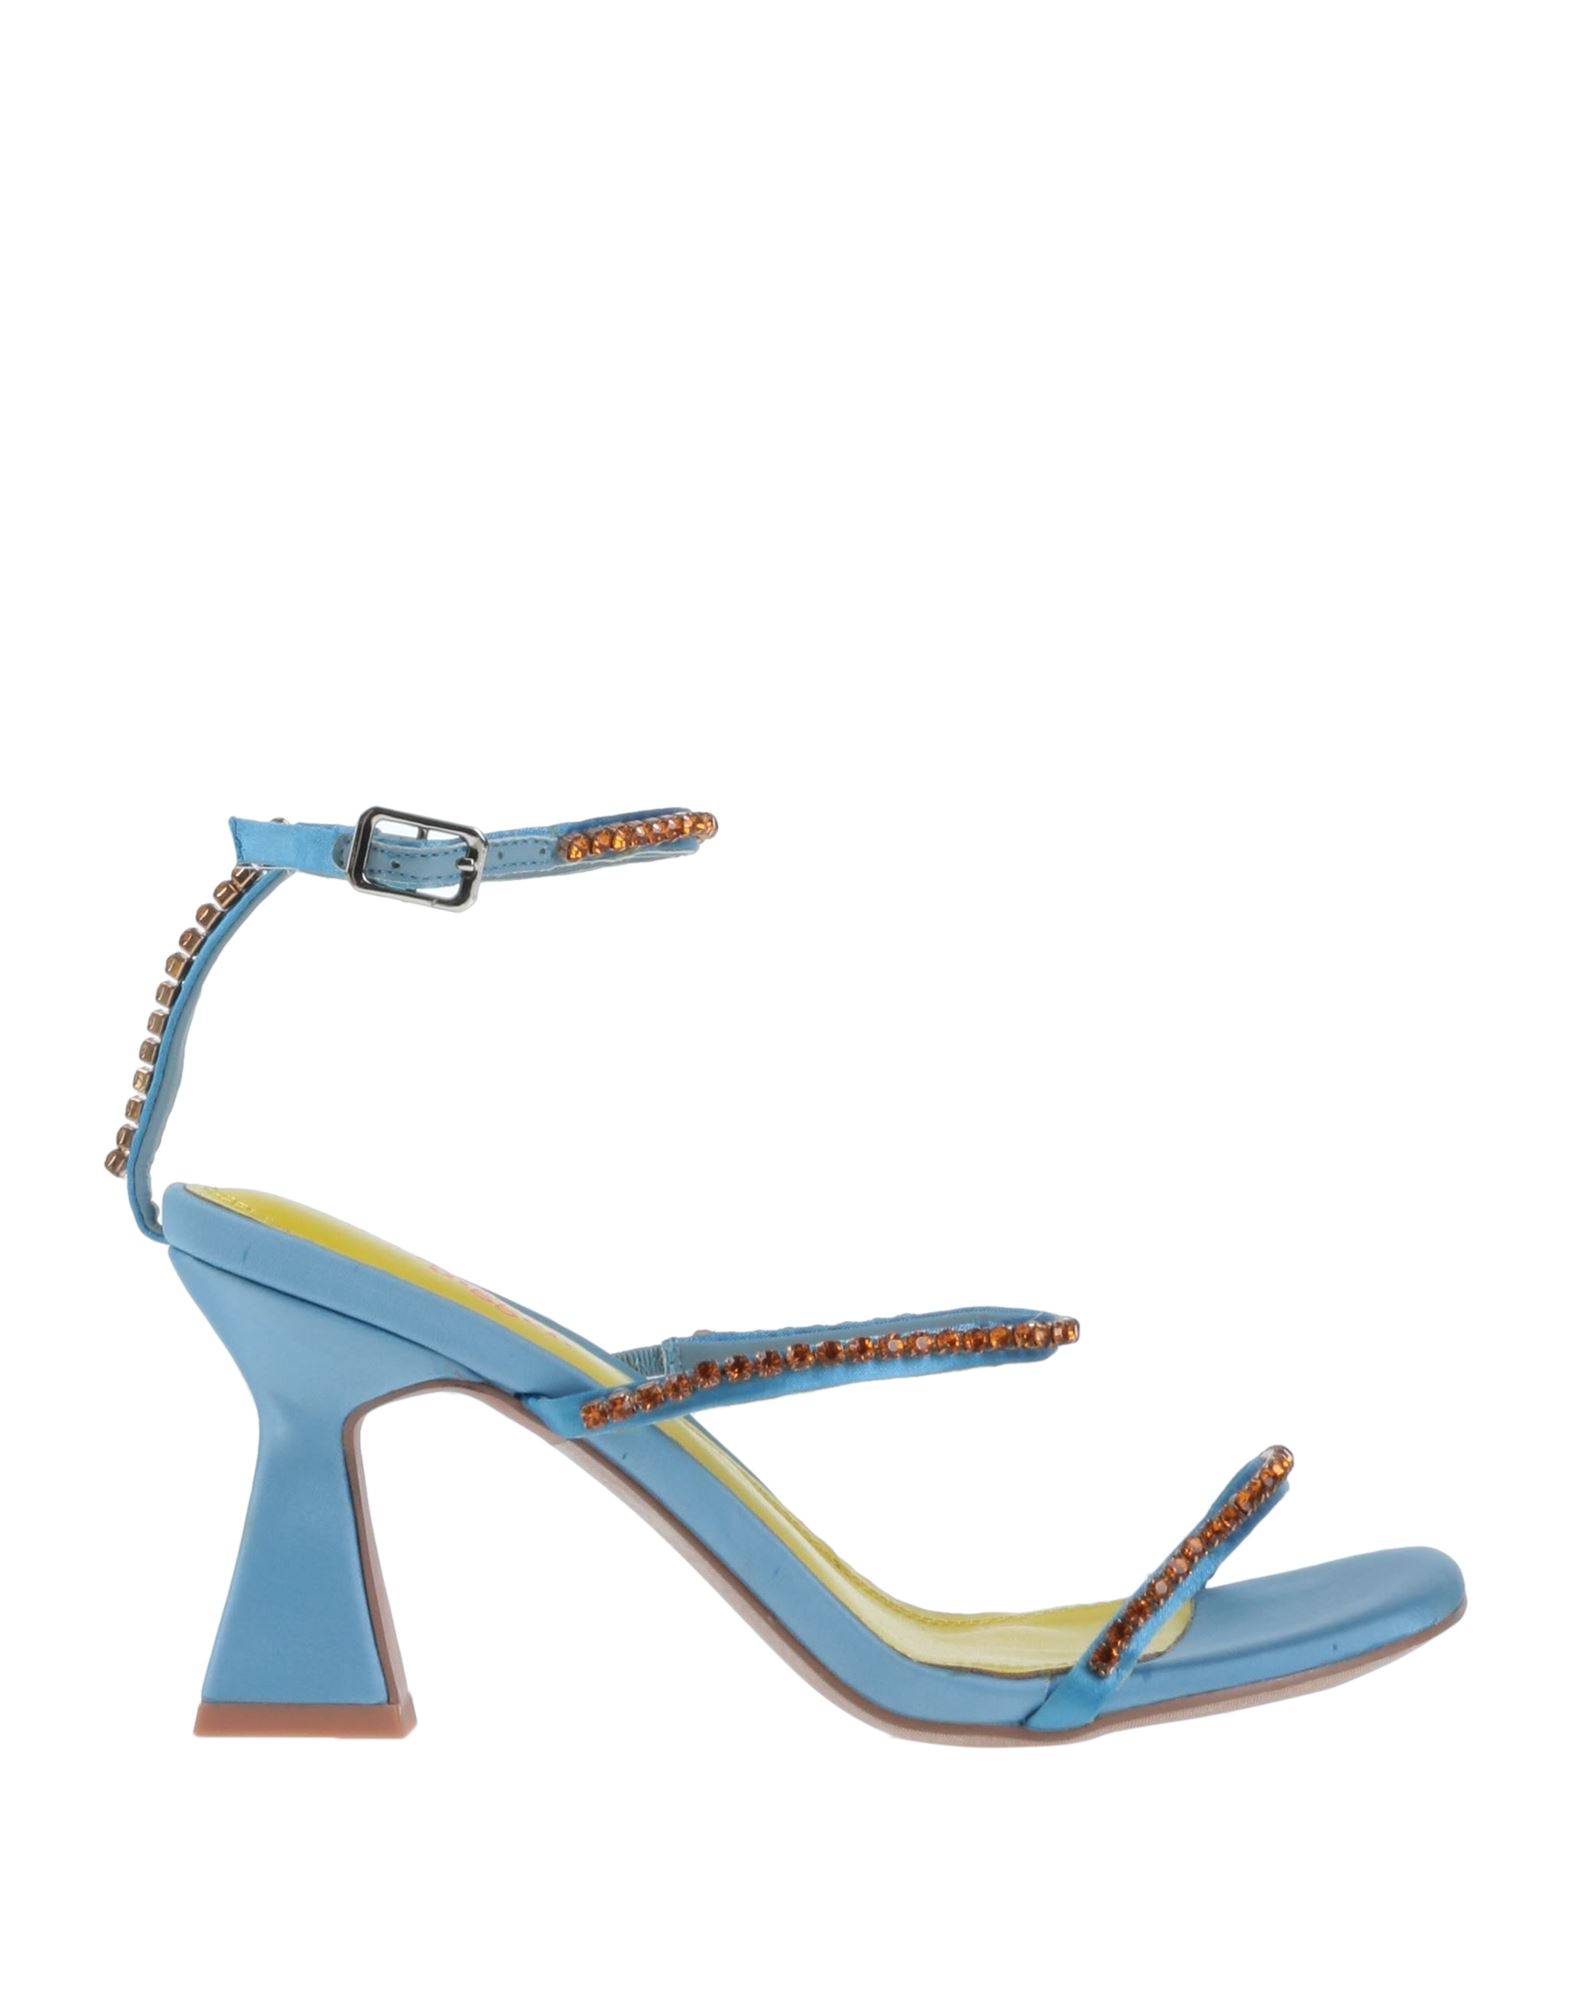 The Goal Digger Sandals In Blue